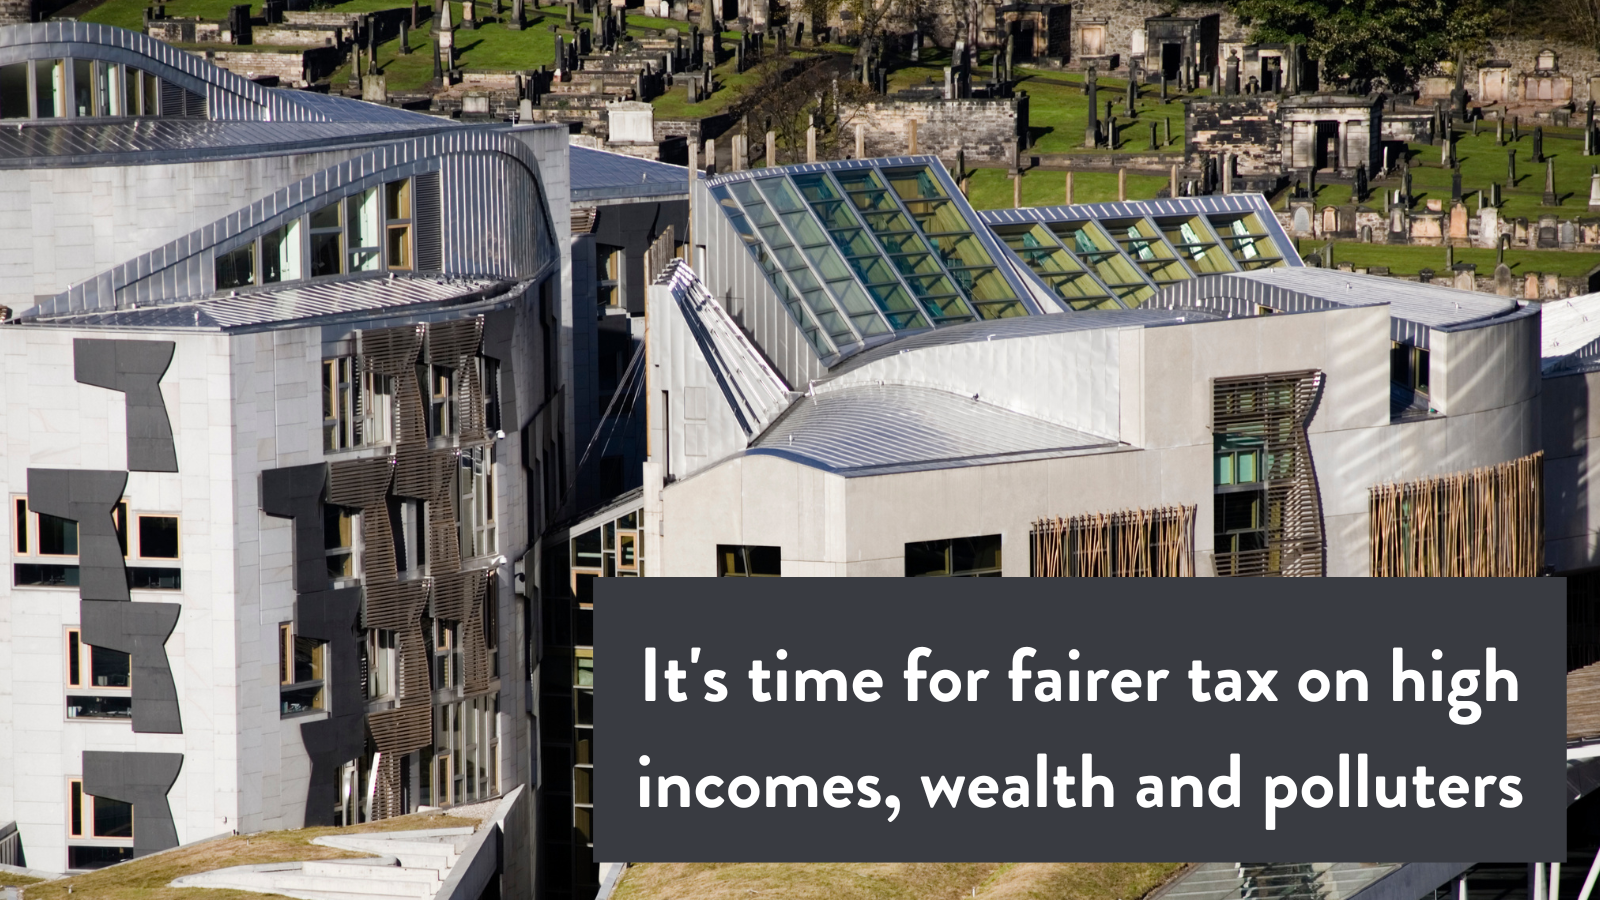 First Minister must prove he isn’t timid on tax, say campaigners